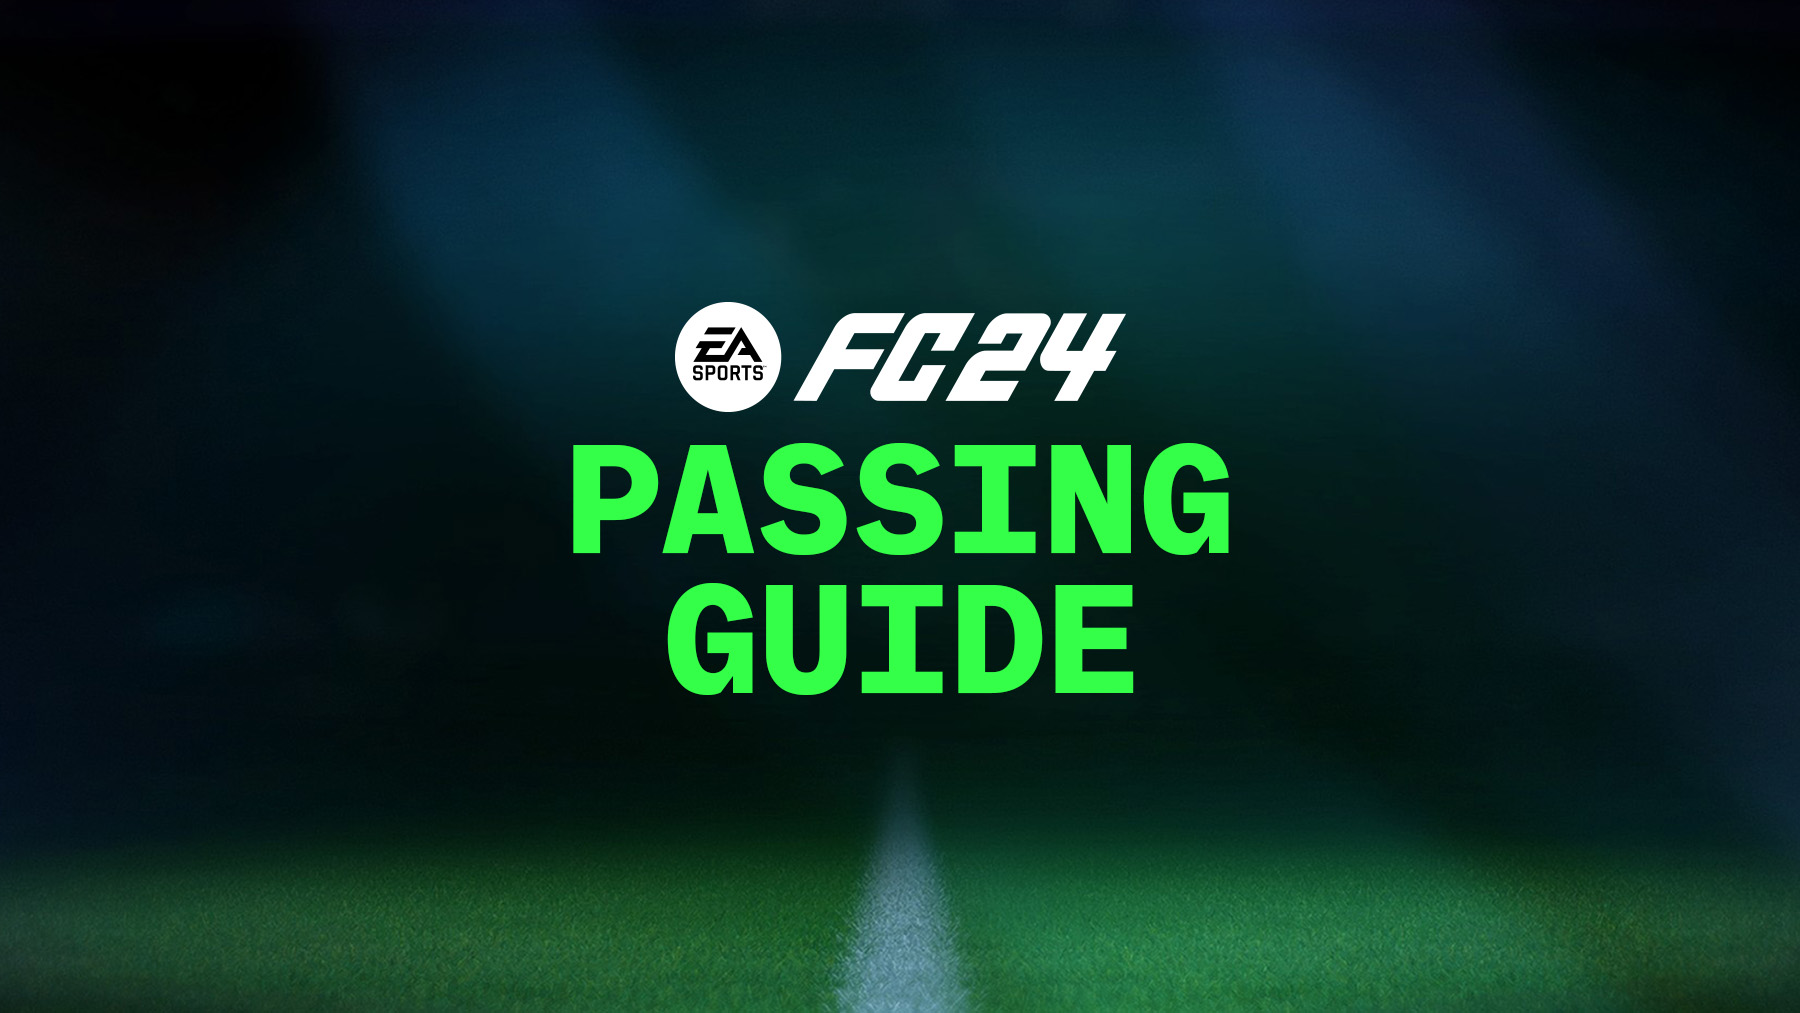 FC 24 Passing Guide